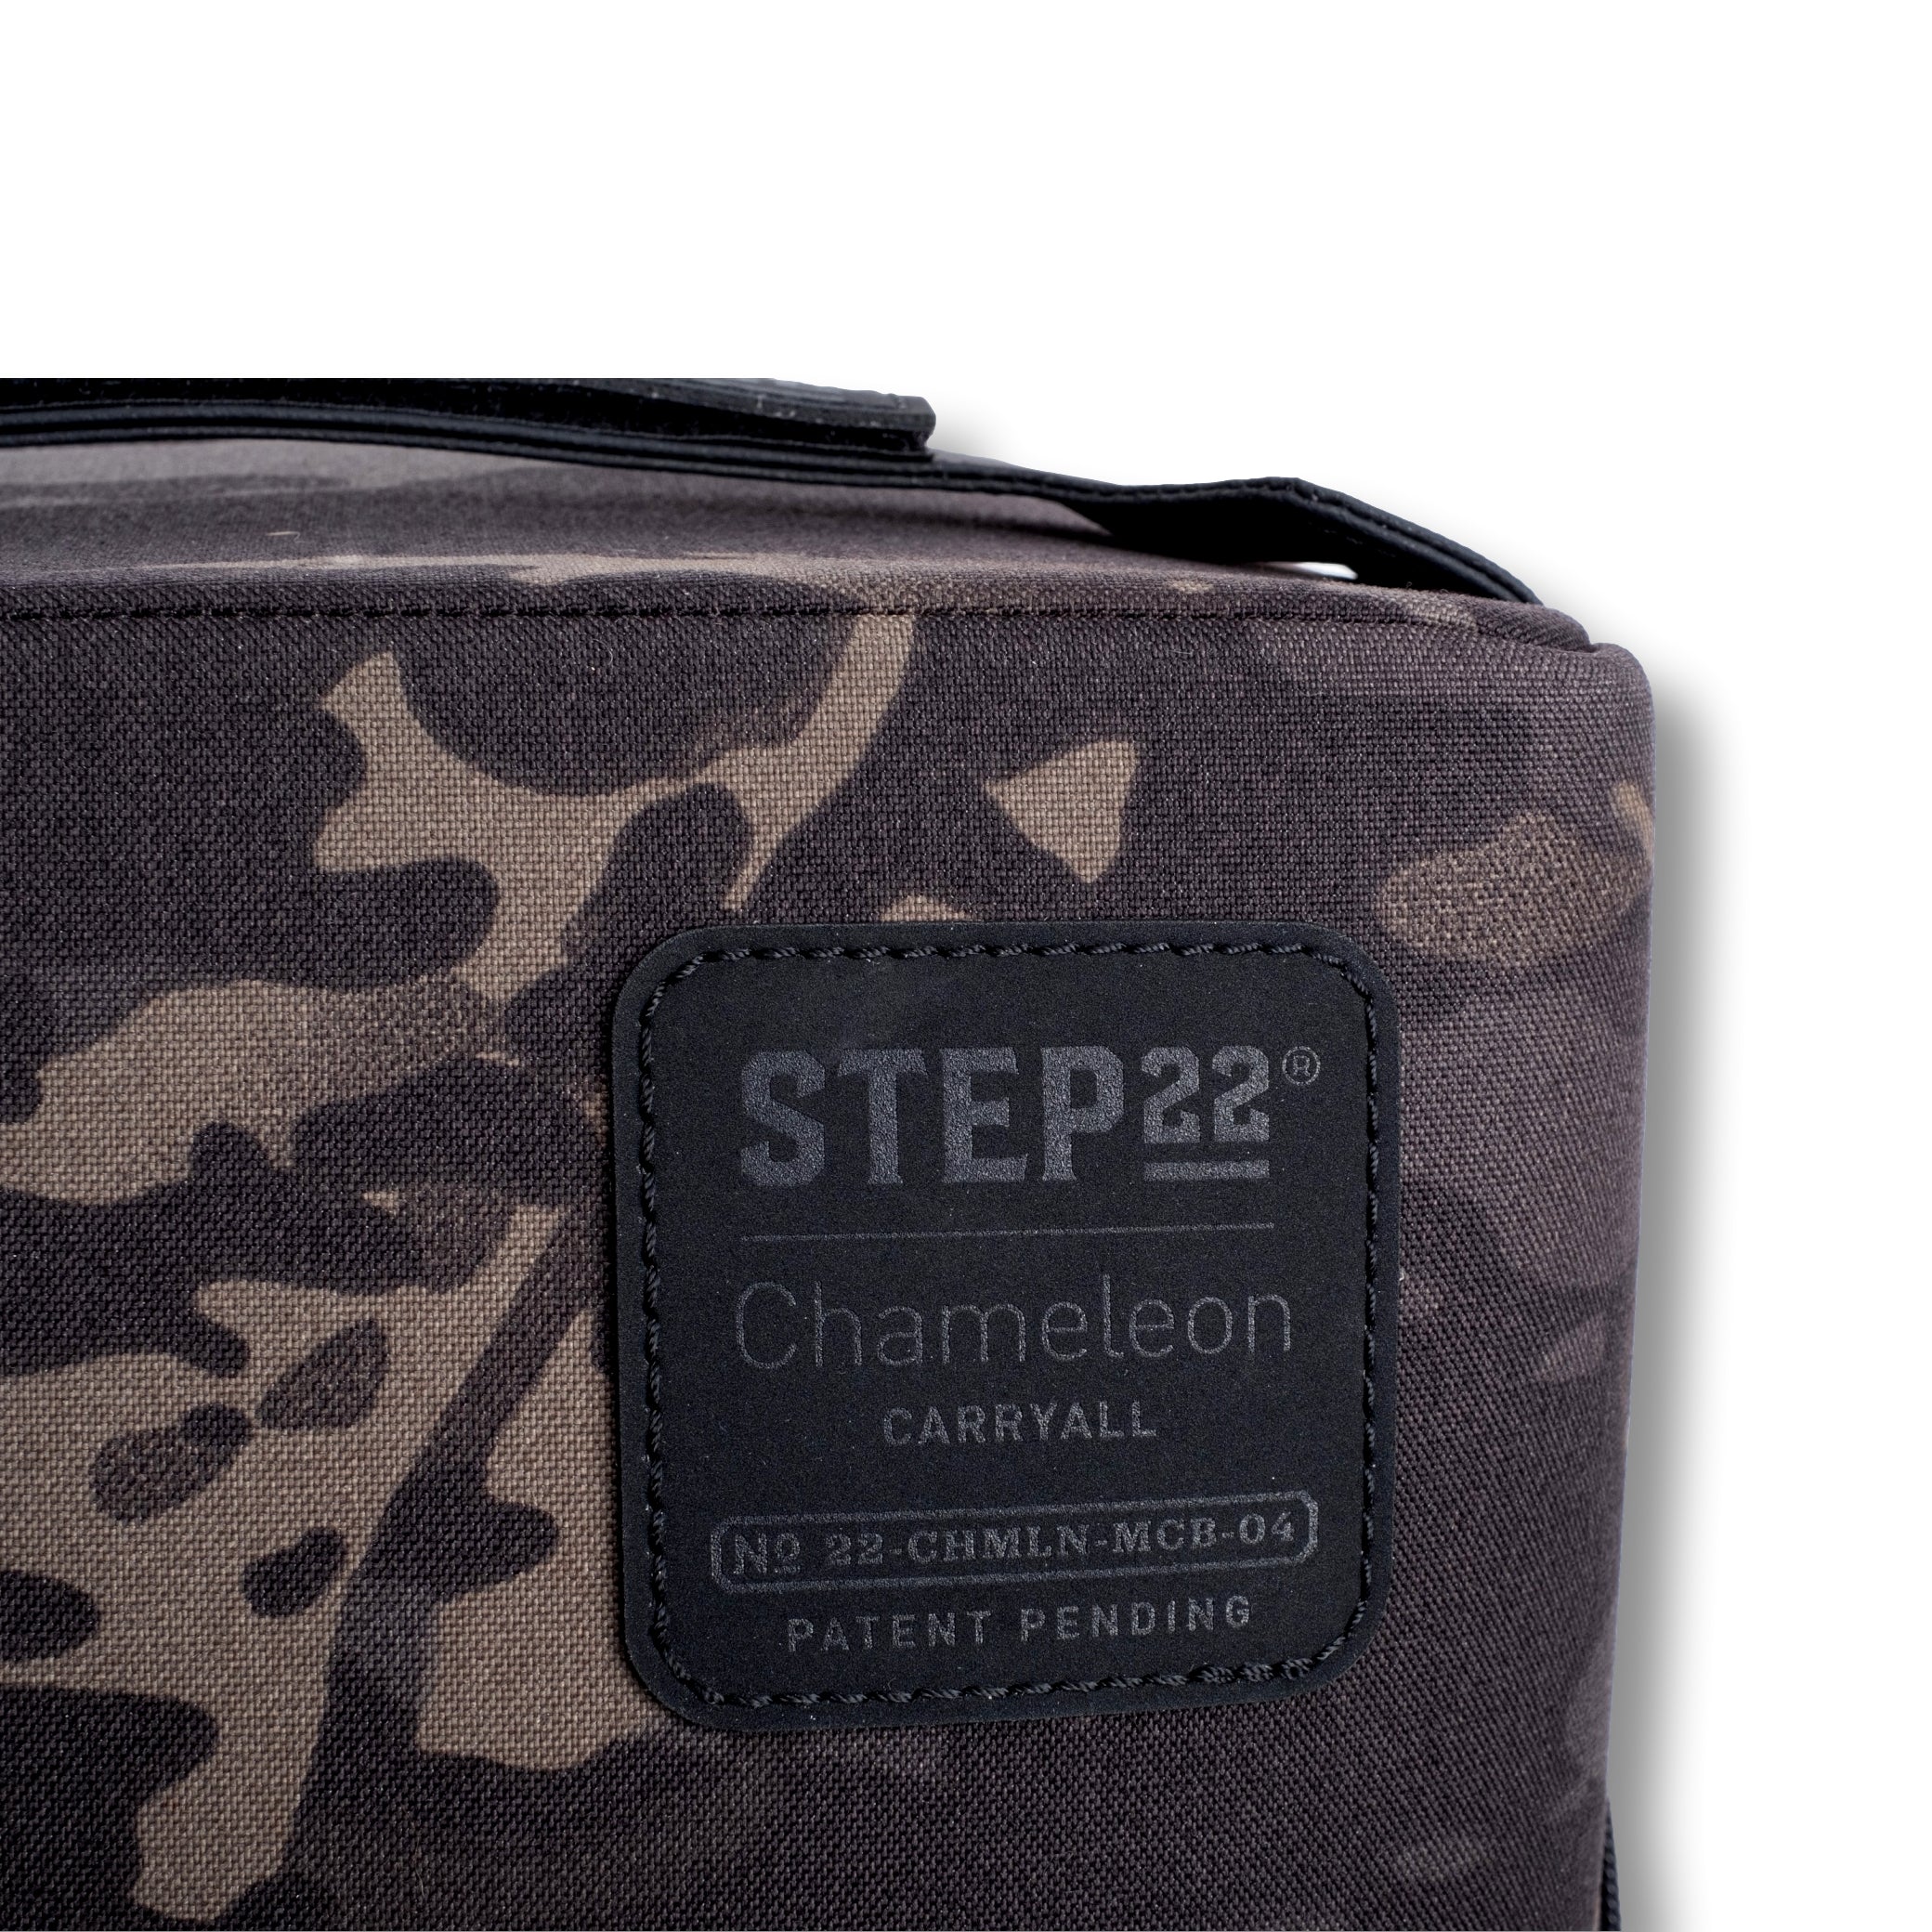 STEP 22 Chameleon™ Carryall with REEF Panel